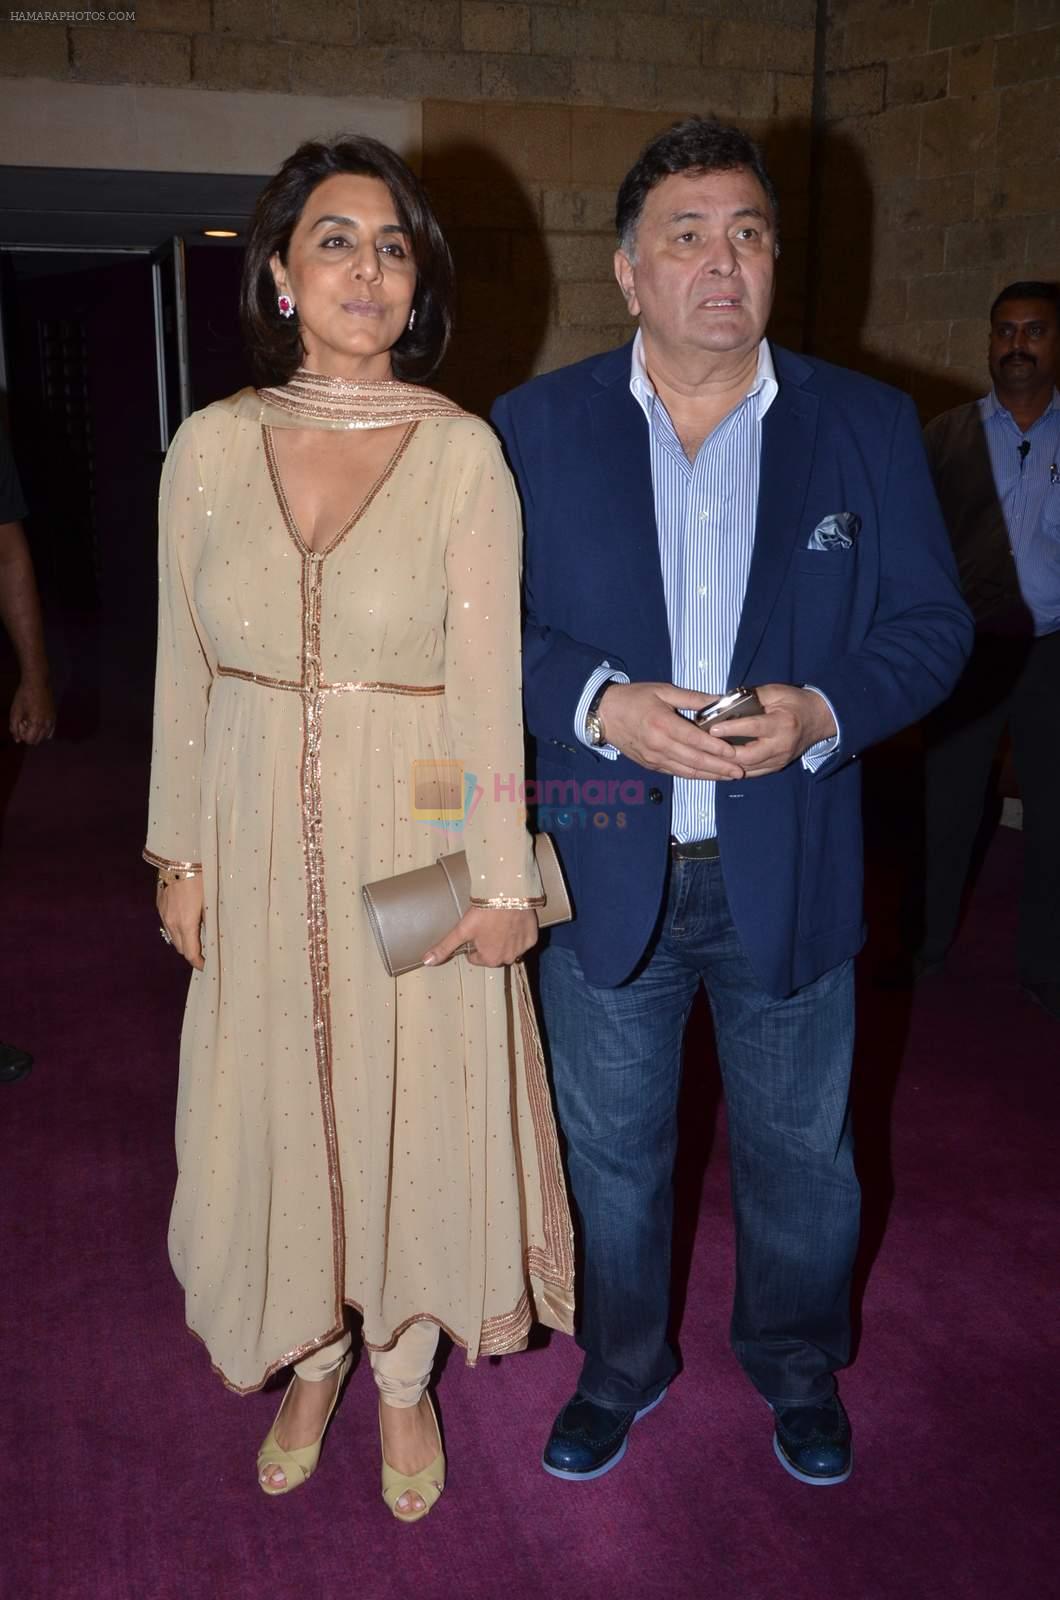 Rishi Kapoor and neetu singh at ccdt ngo event on 30th Nov 2015